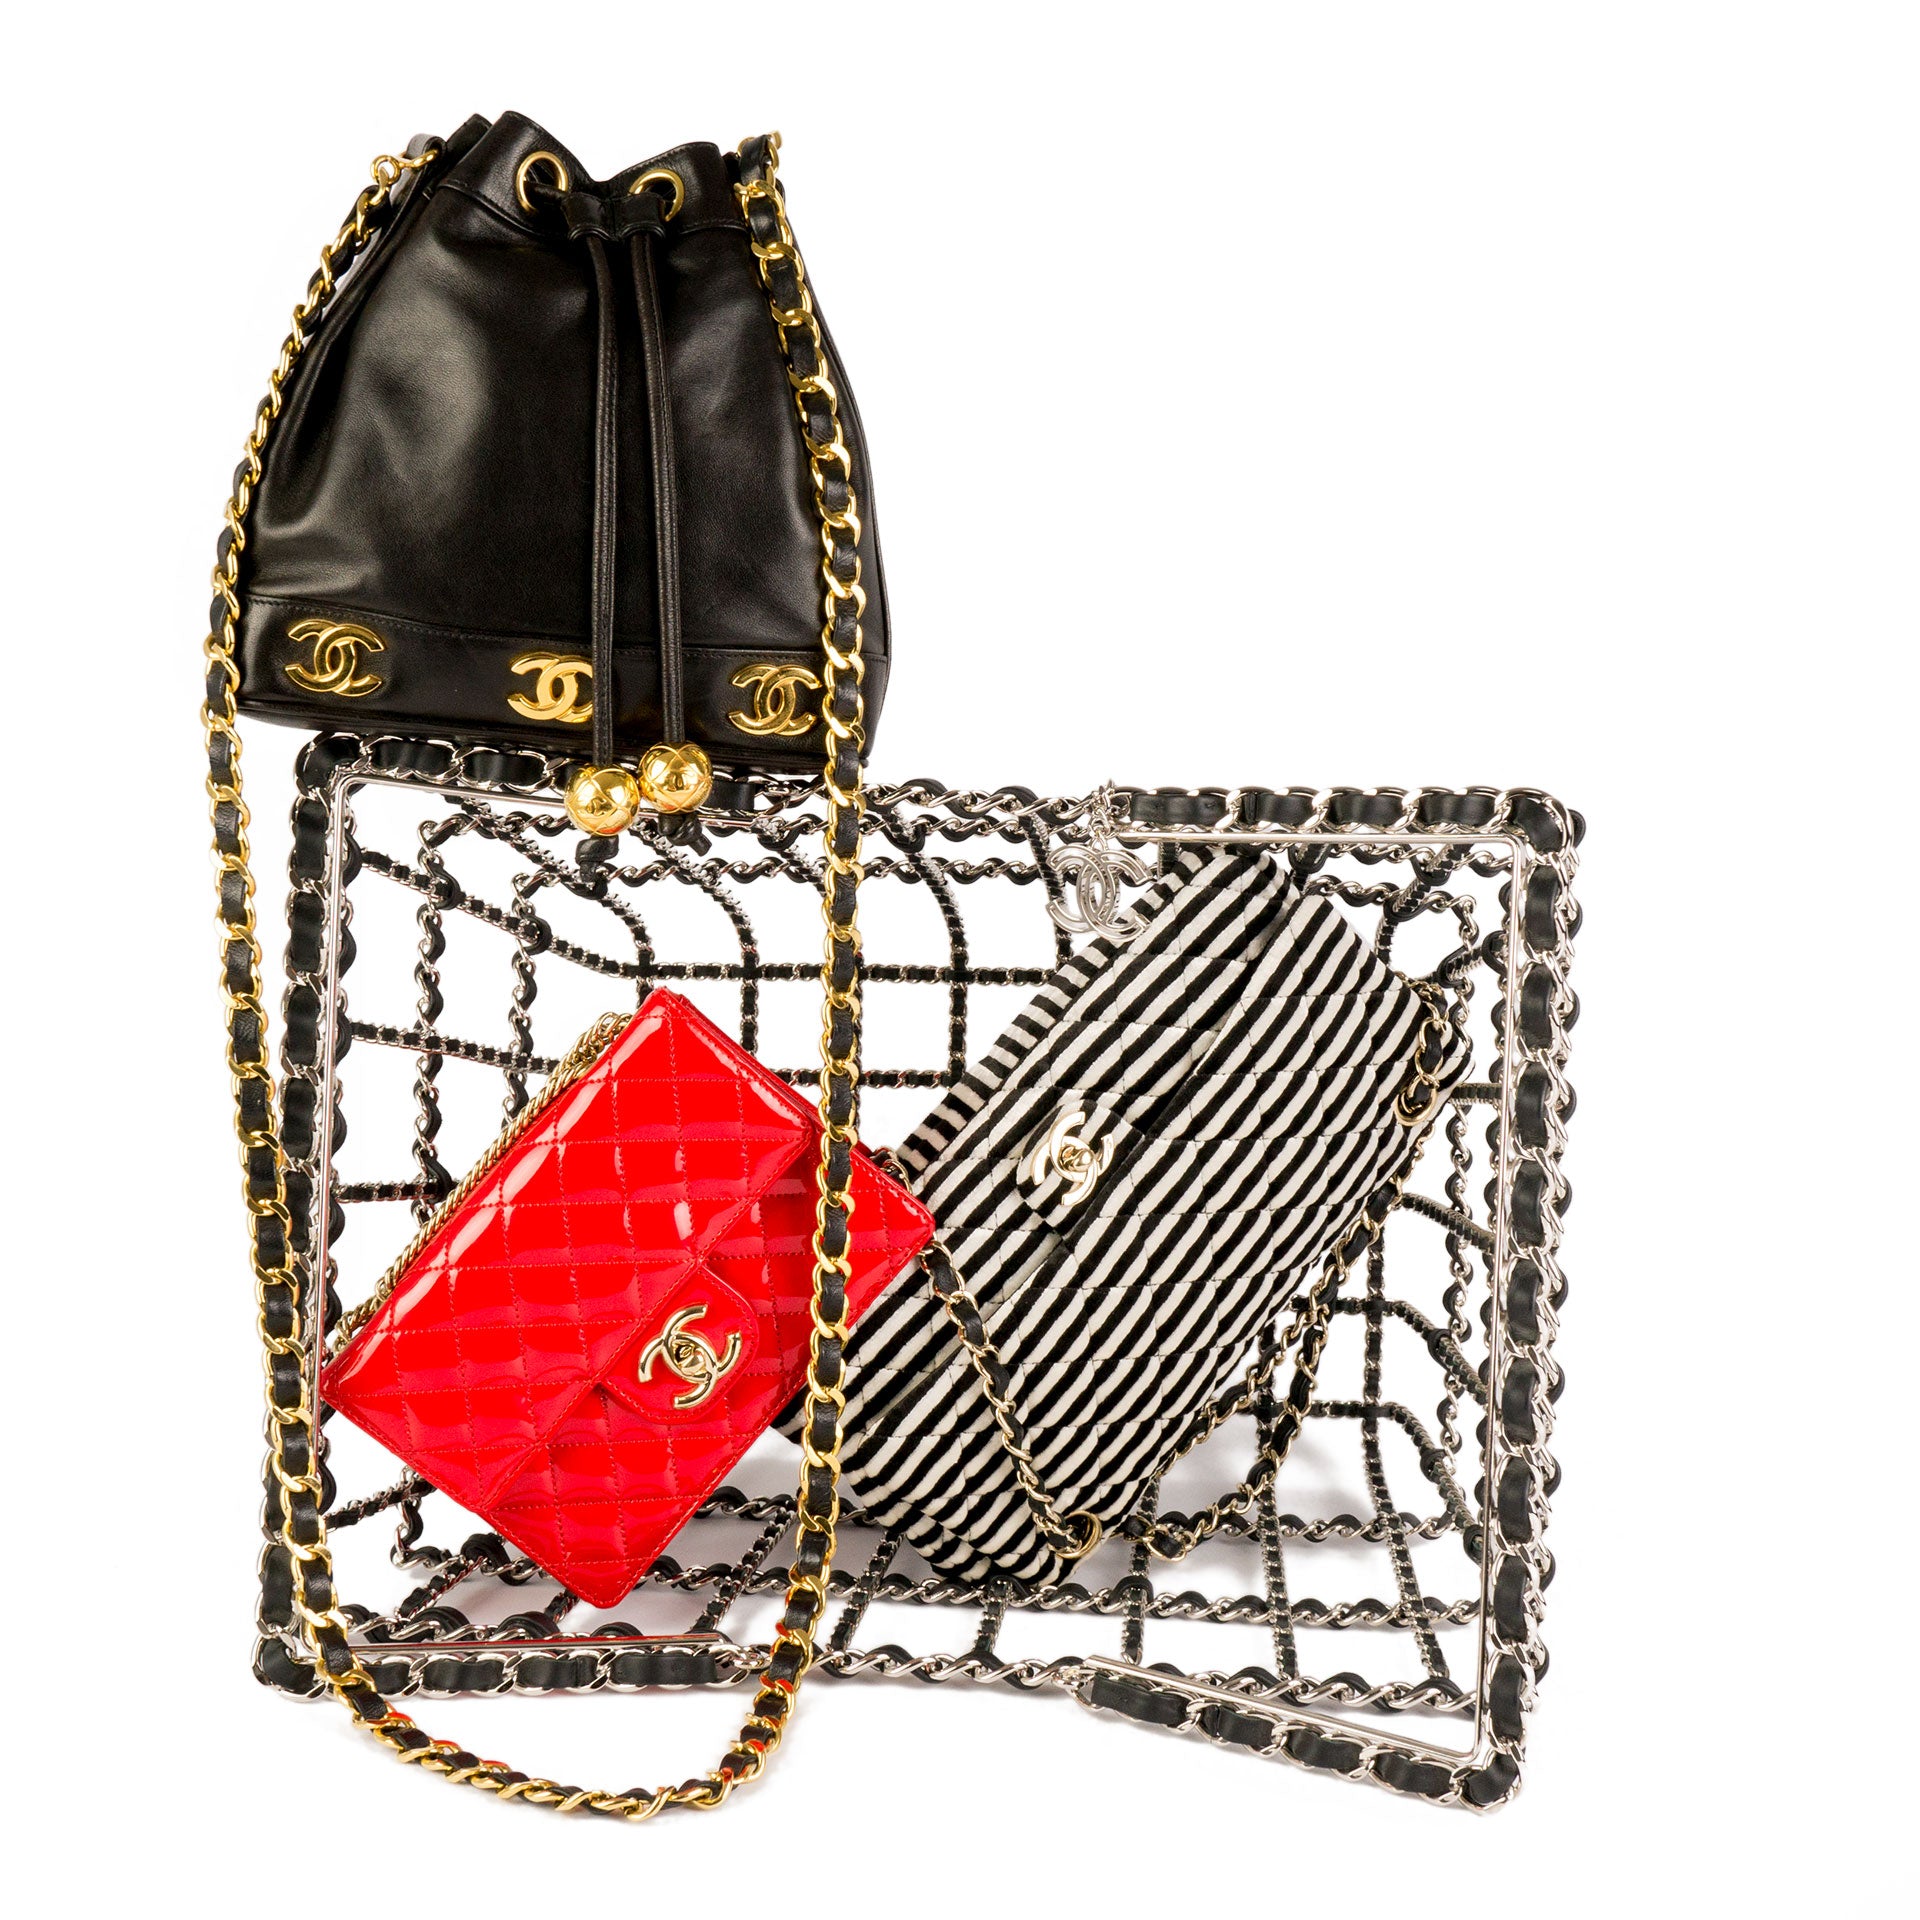 Stunning Chanel Bags Collection From Chanel's Grocery Shop A/W